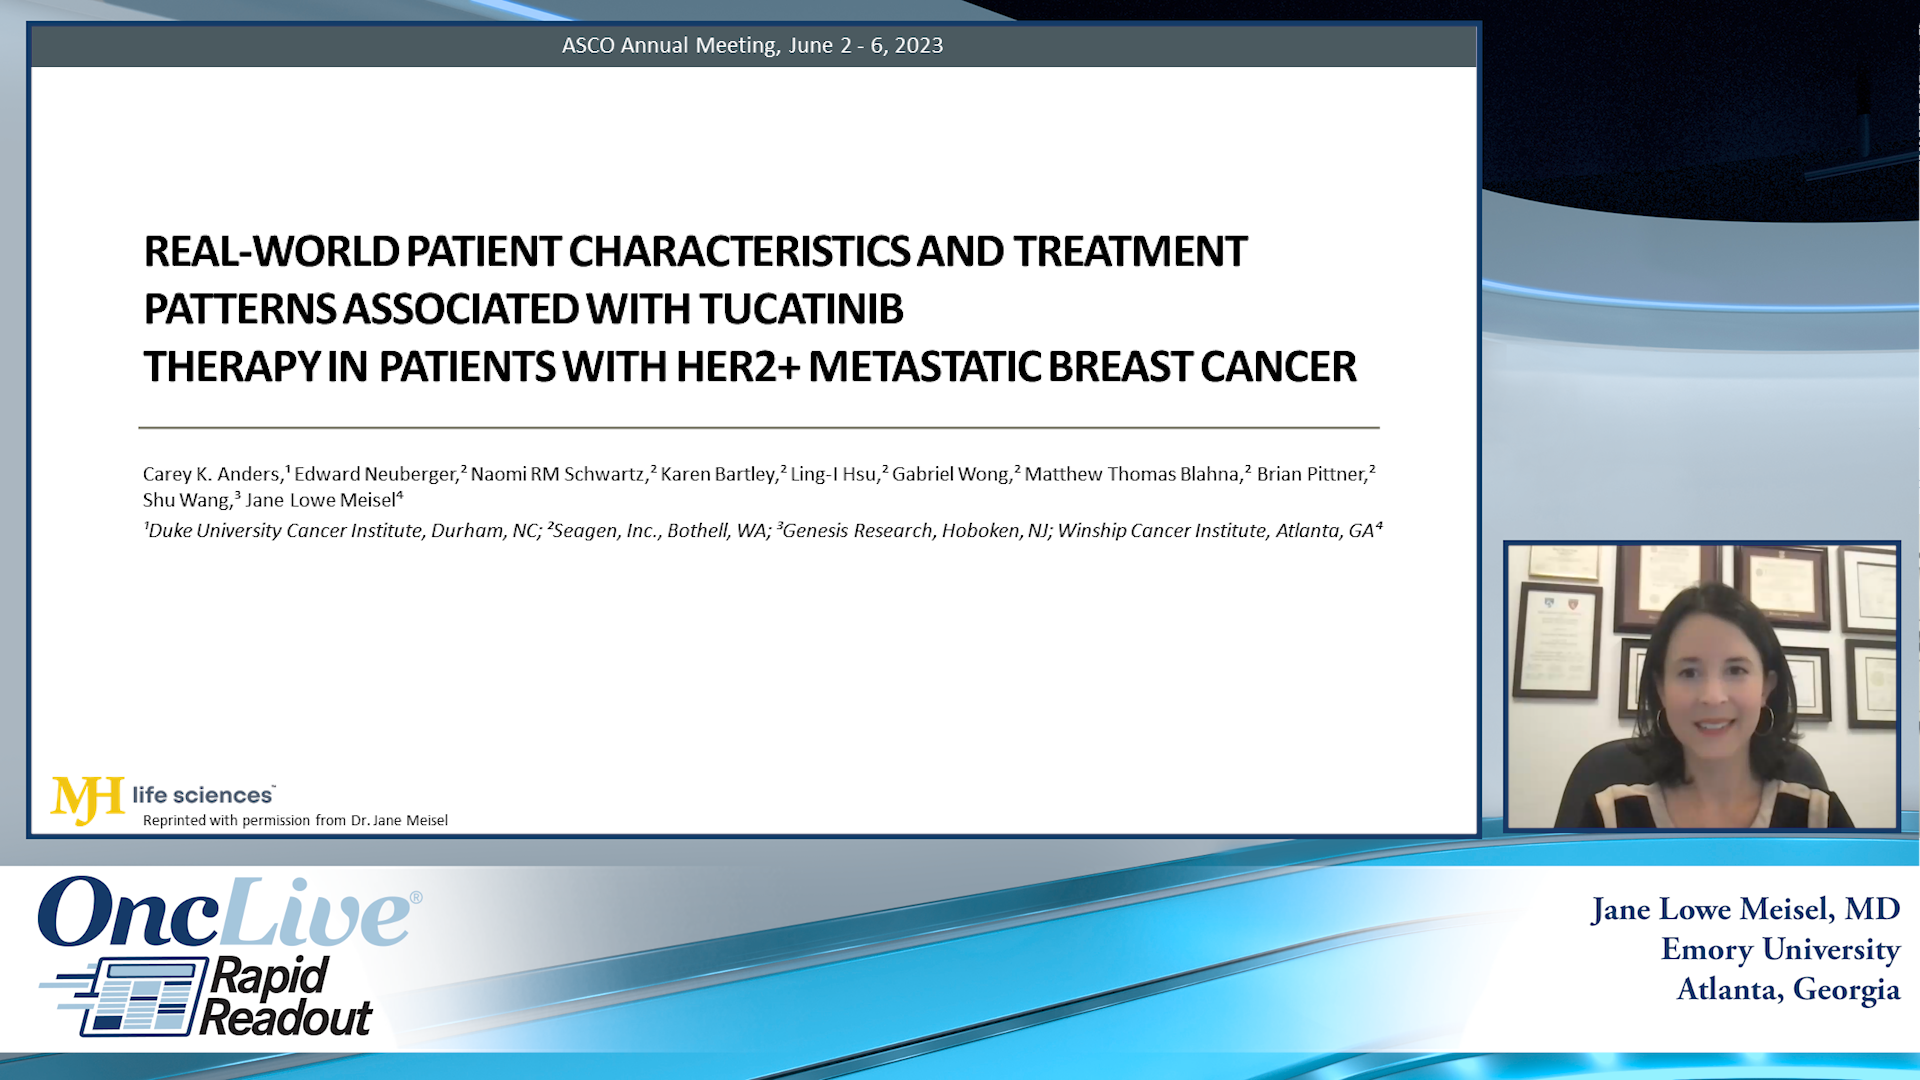 Real-World Patient Characteristics and Treatment Patterns Associated With Tucatinib Therapy in Patients With HER2+ Metastatic Breast Cancer